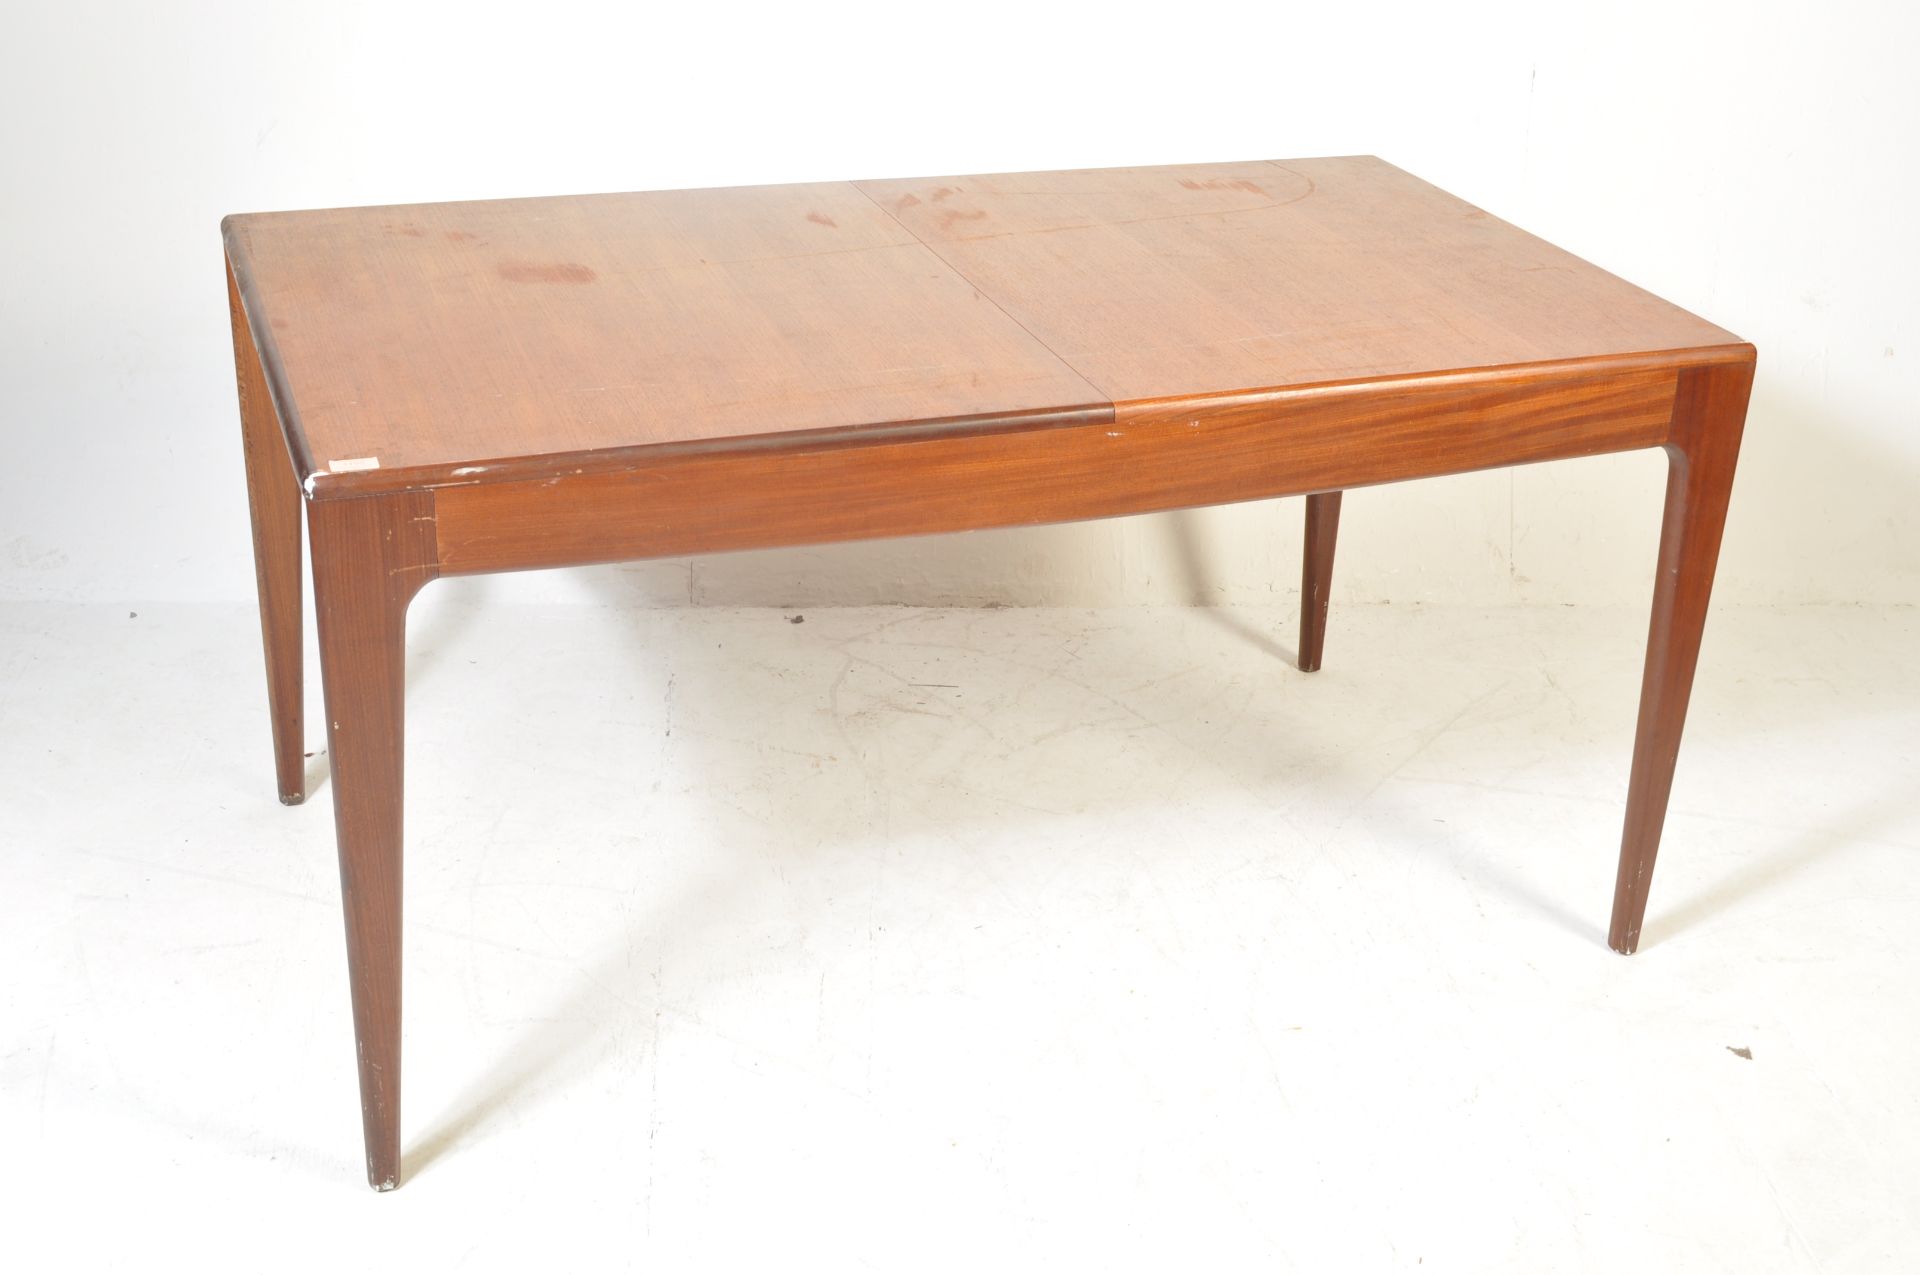 MID 20TH CENTURY TEAK WOOD EXTENDING DING TABLE - Image 3 of 7